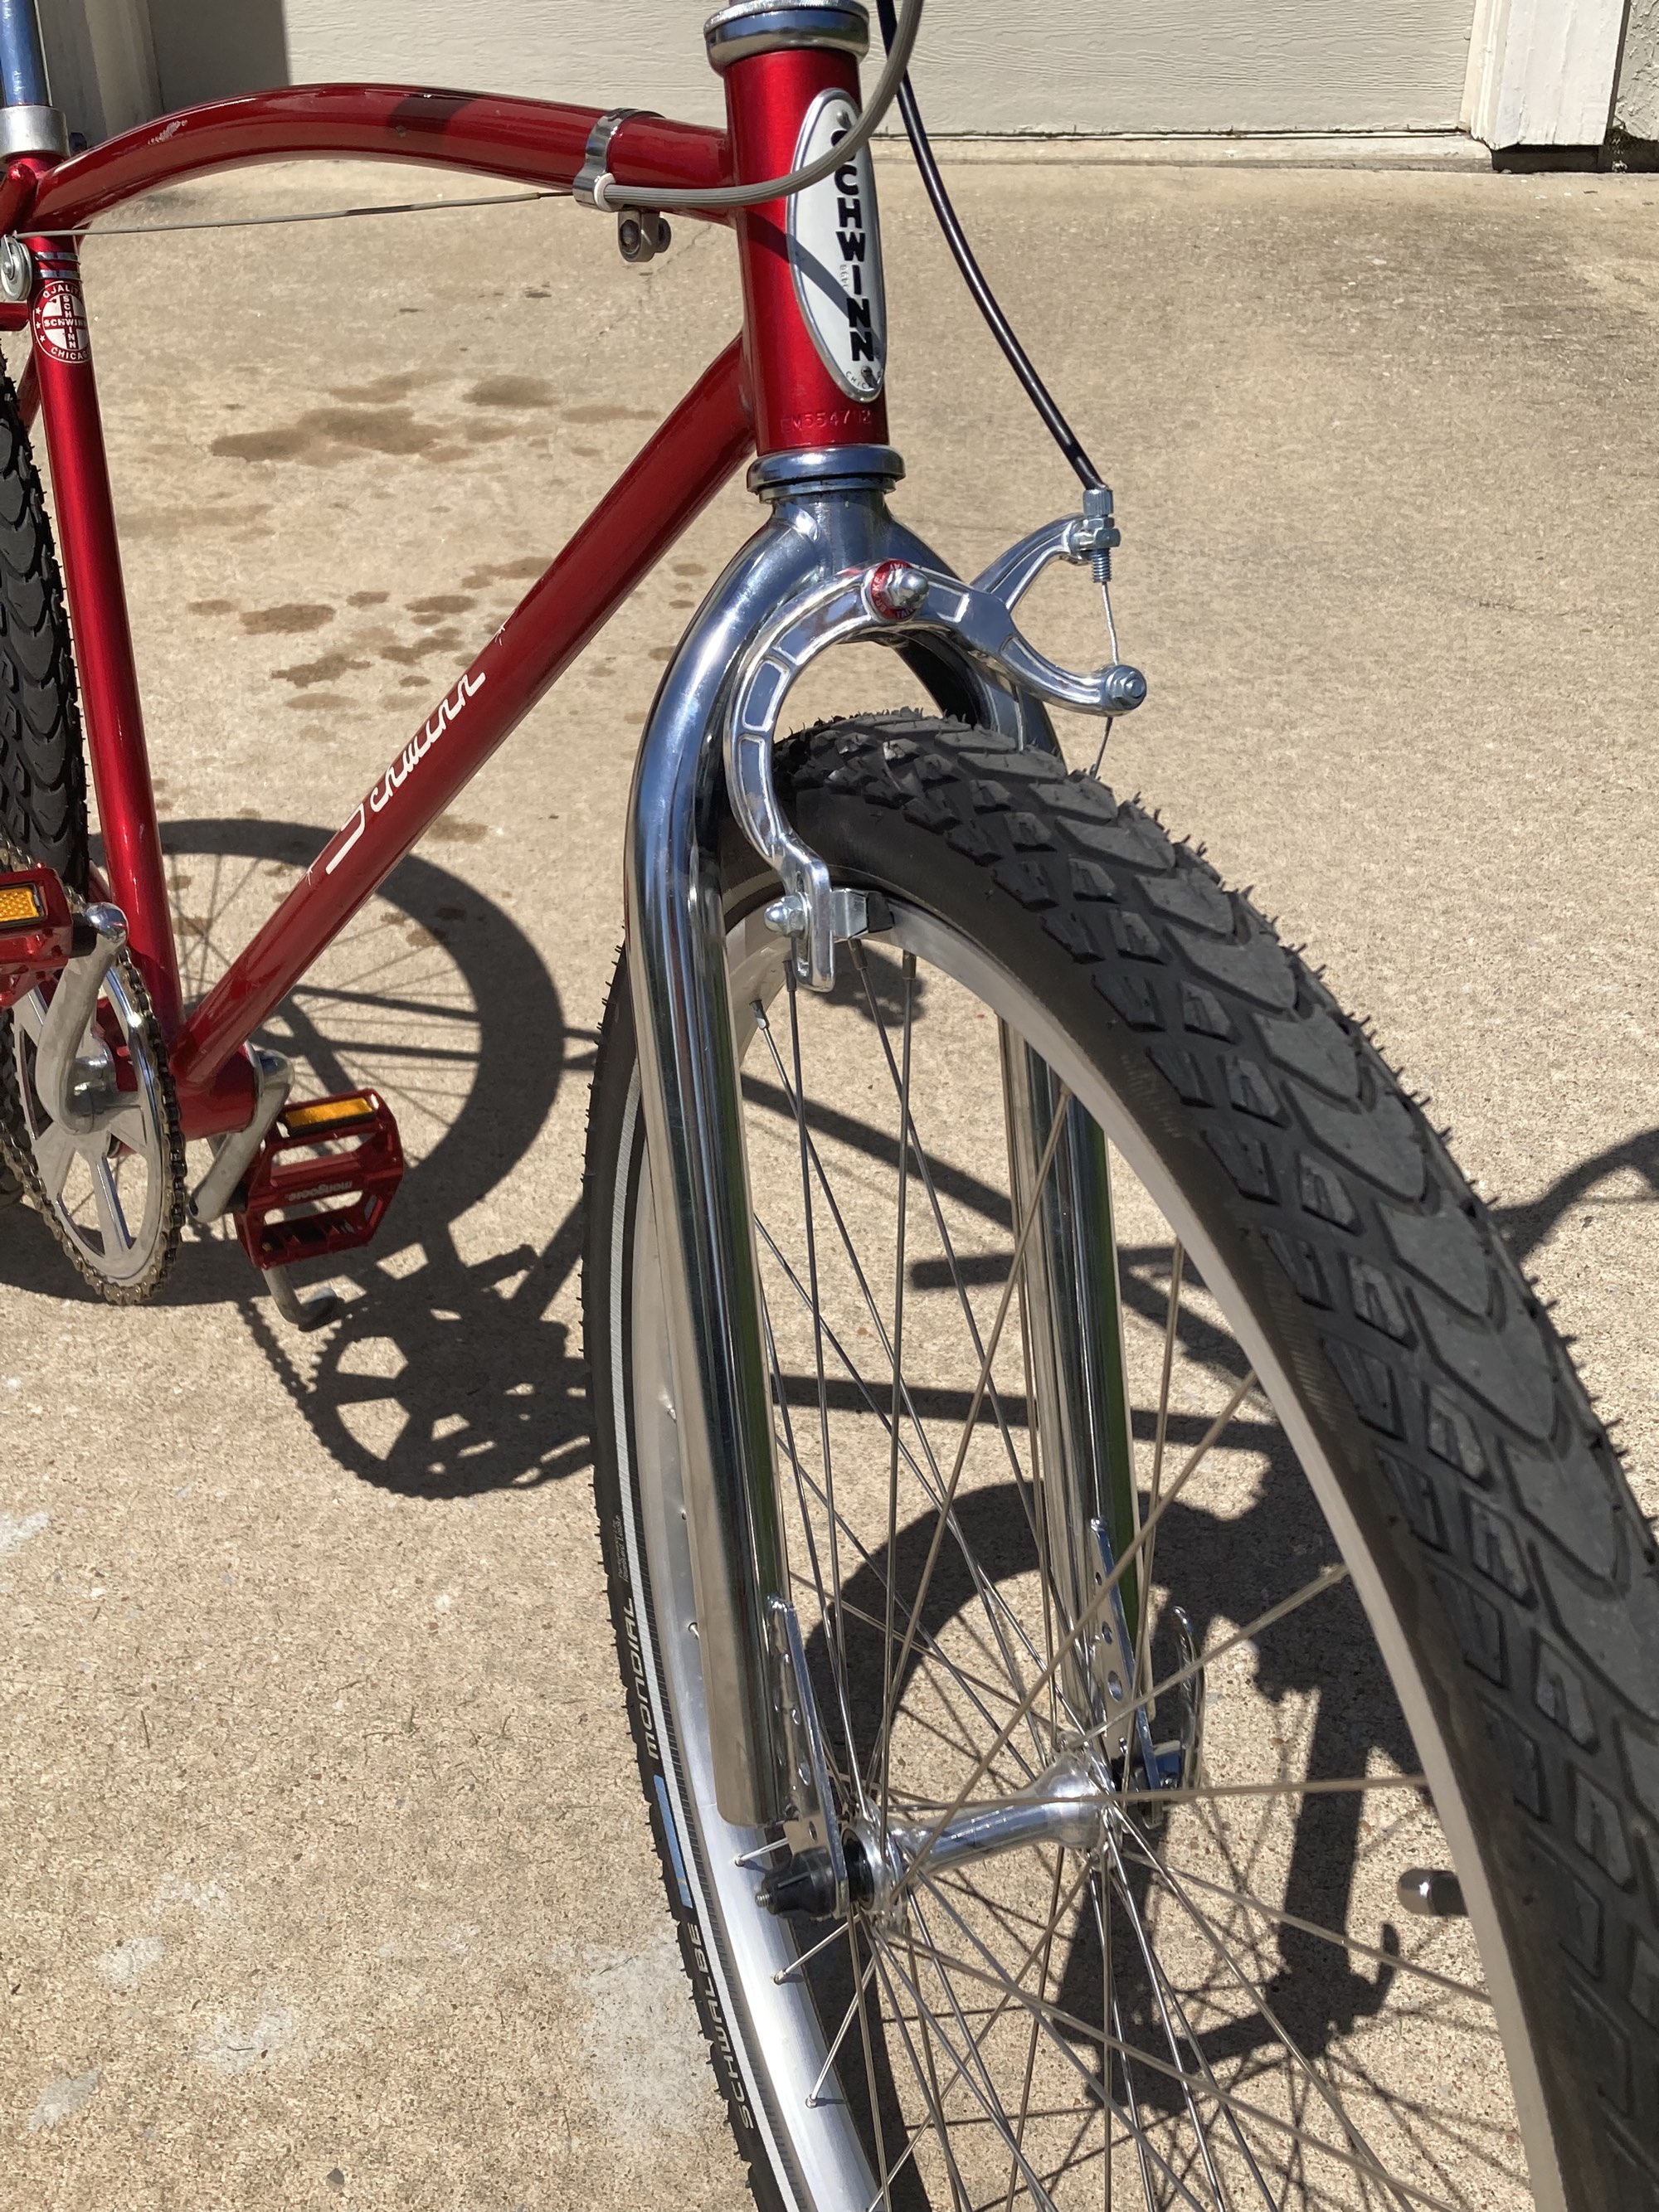 80's style tubular fork and reproduction Dia-Compe MX brakes